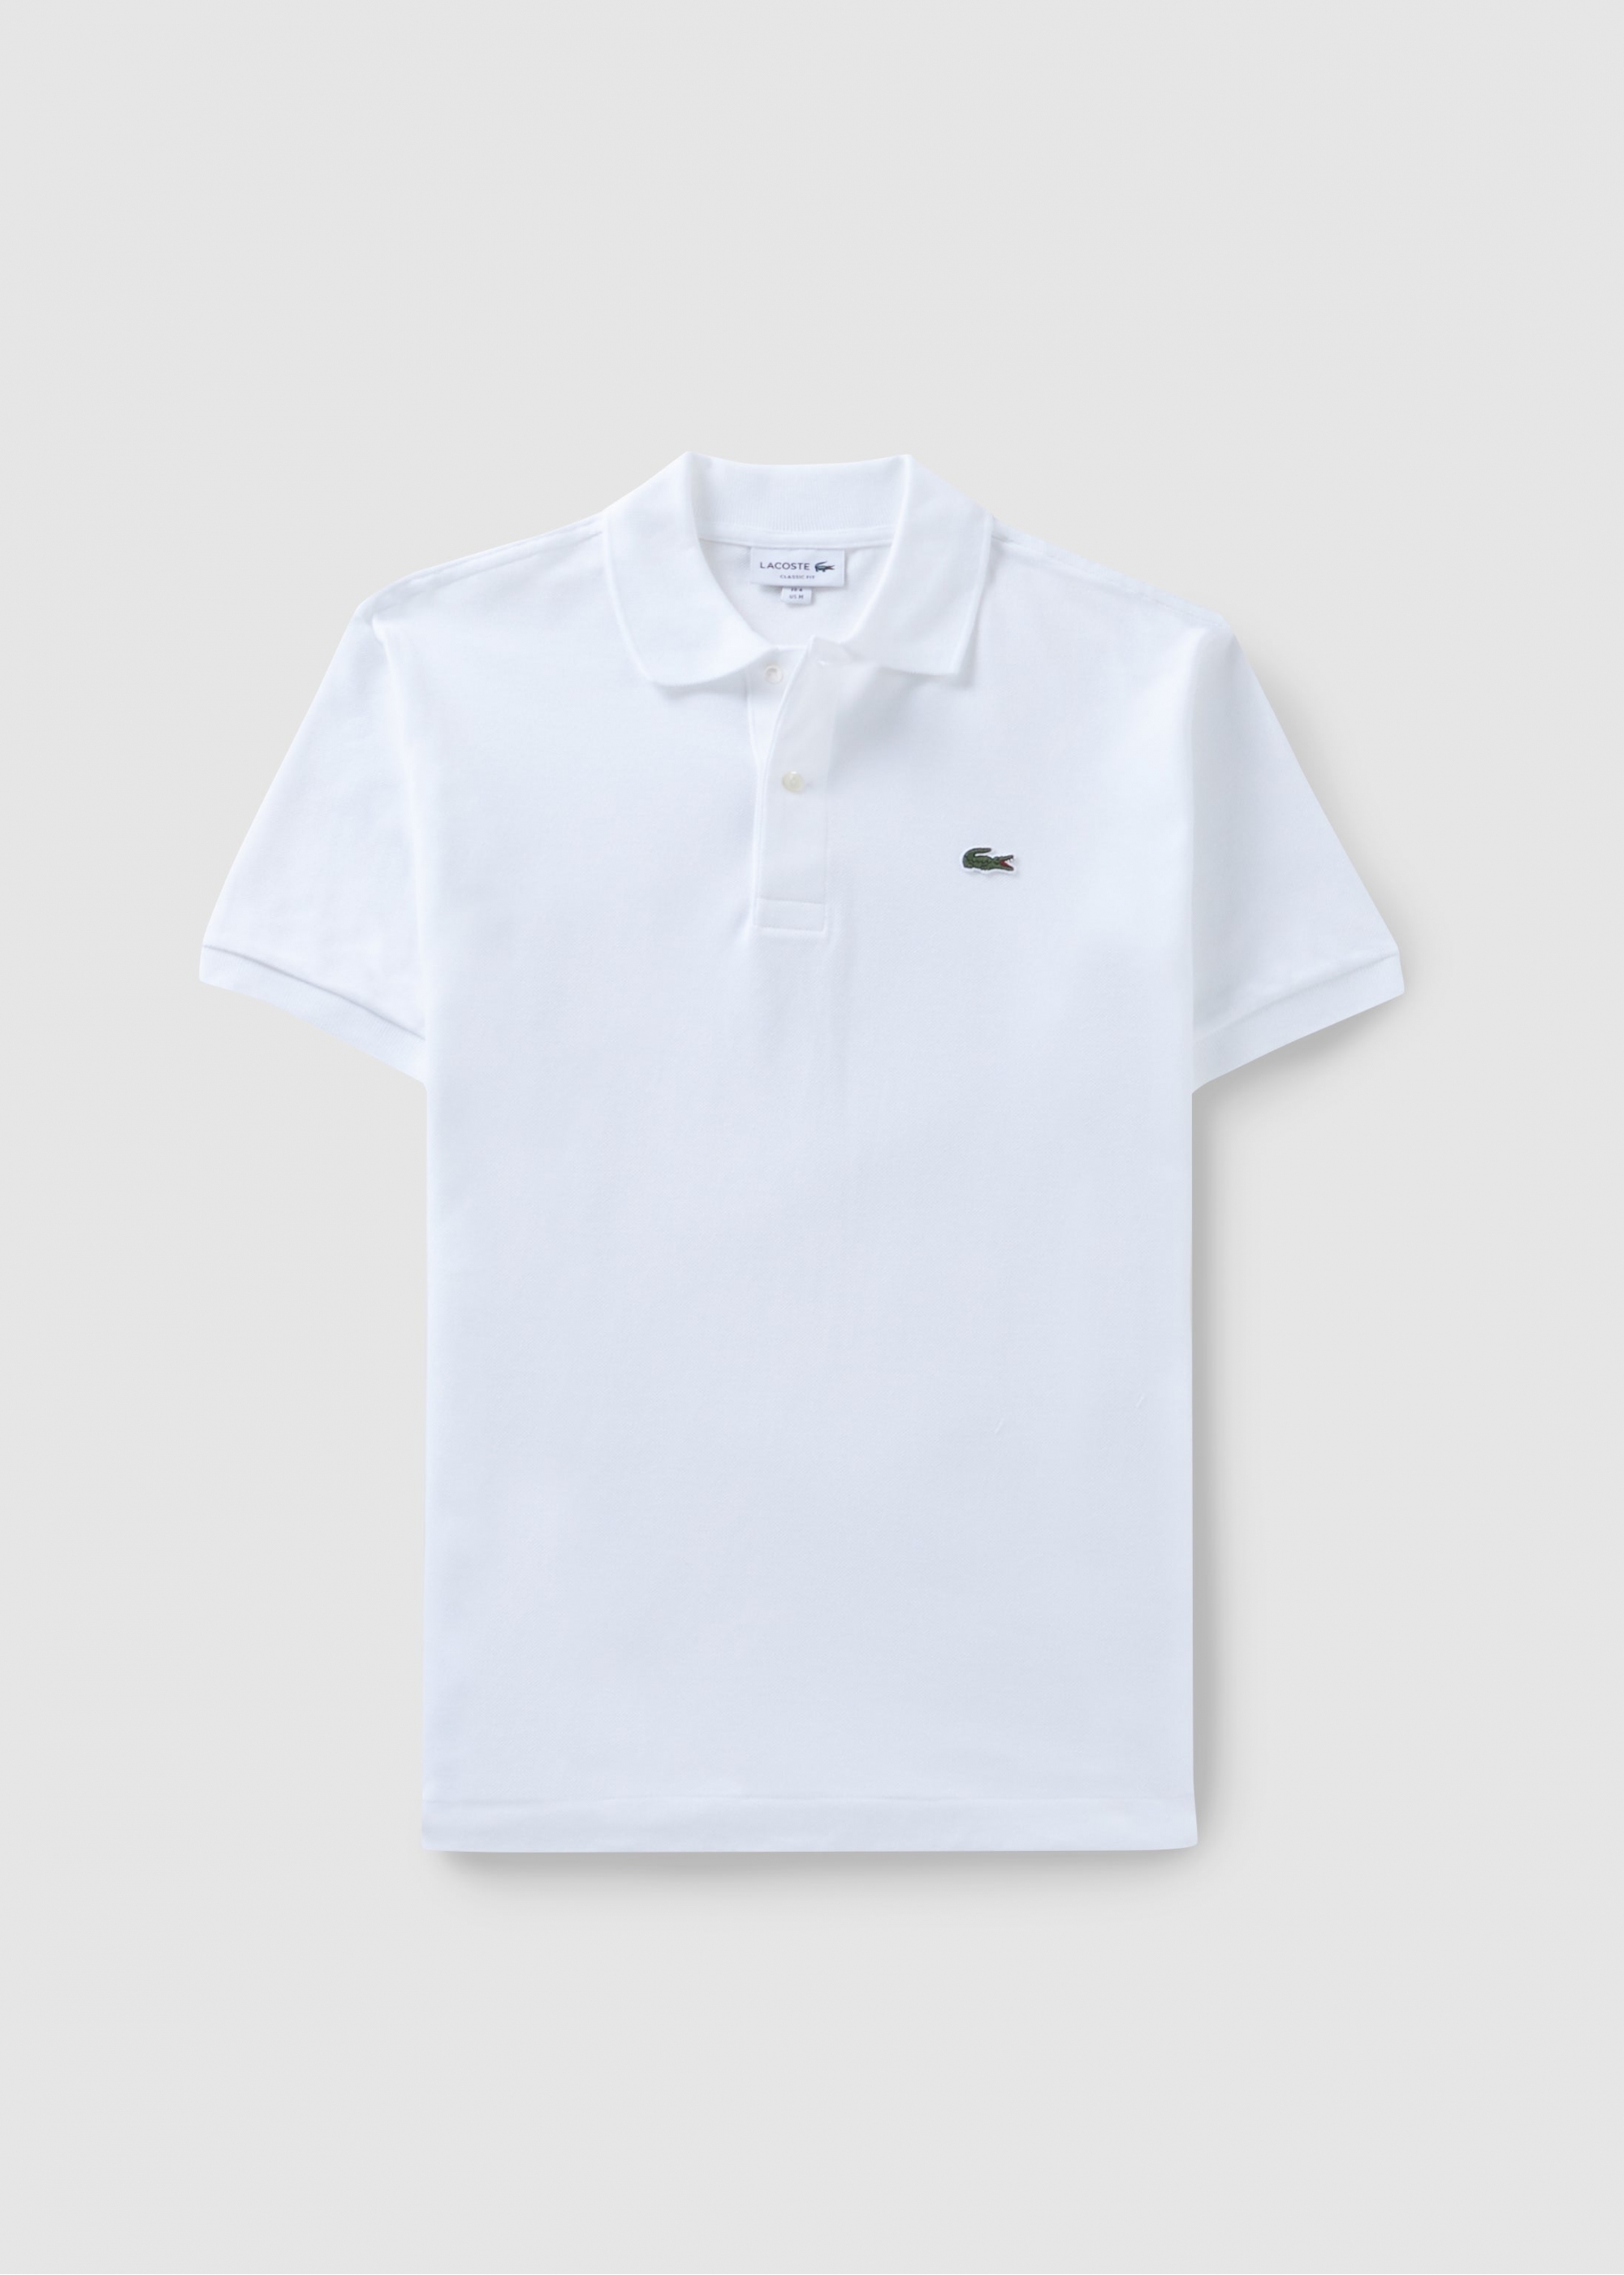 Lacoste Mens Classic Pique Polo Shirt In White